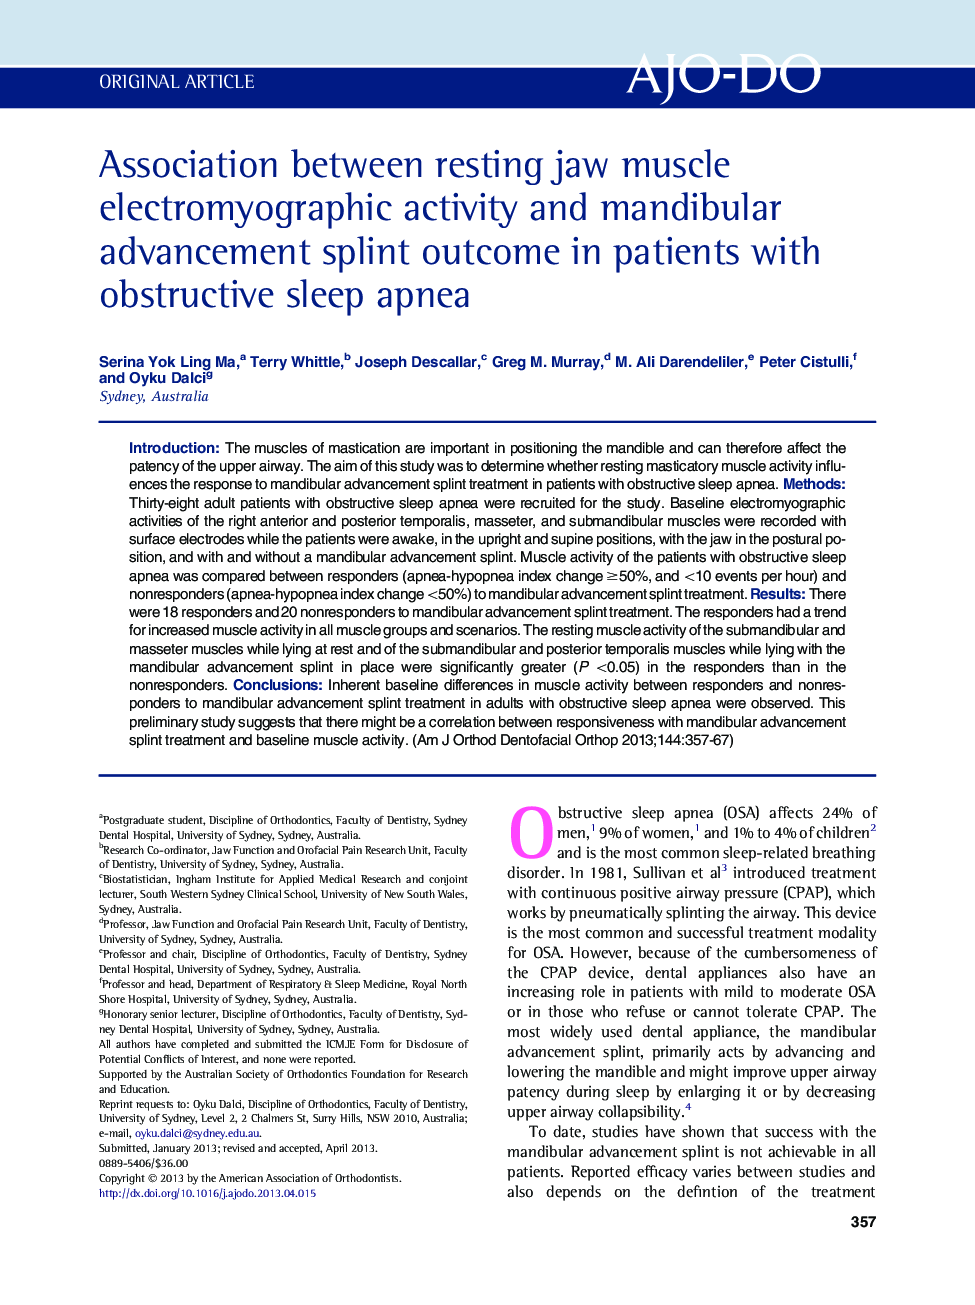 Association between resting jaw muscle electromyographic activity and mandibular advancement splint outcome in patients with obstructive sleep apnea 